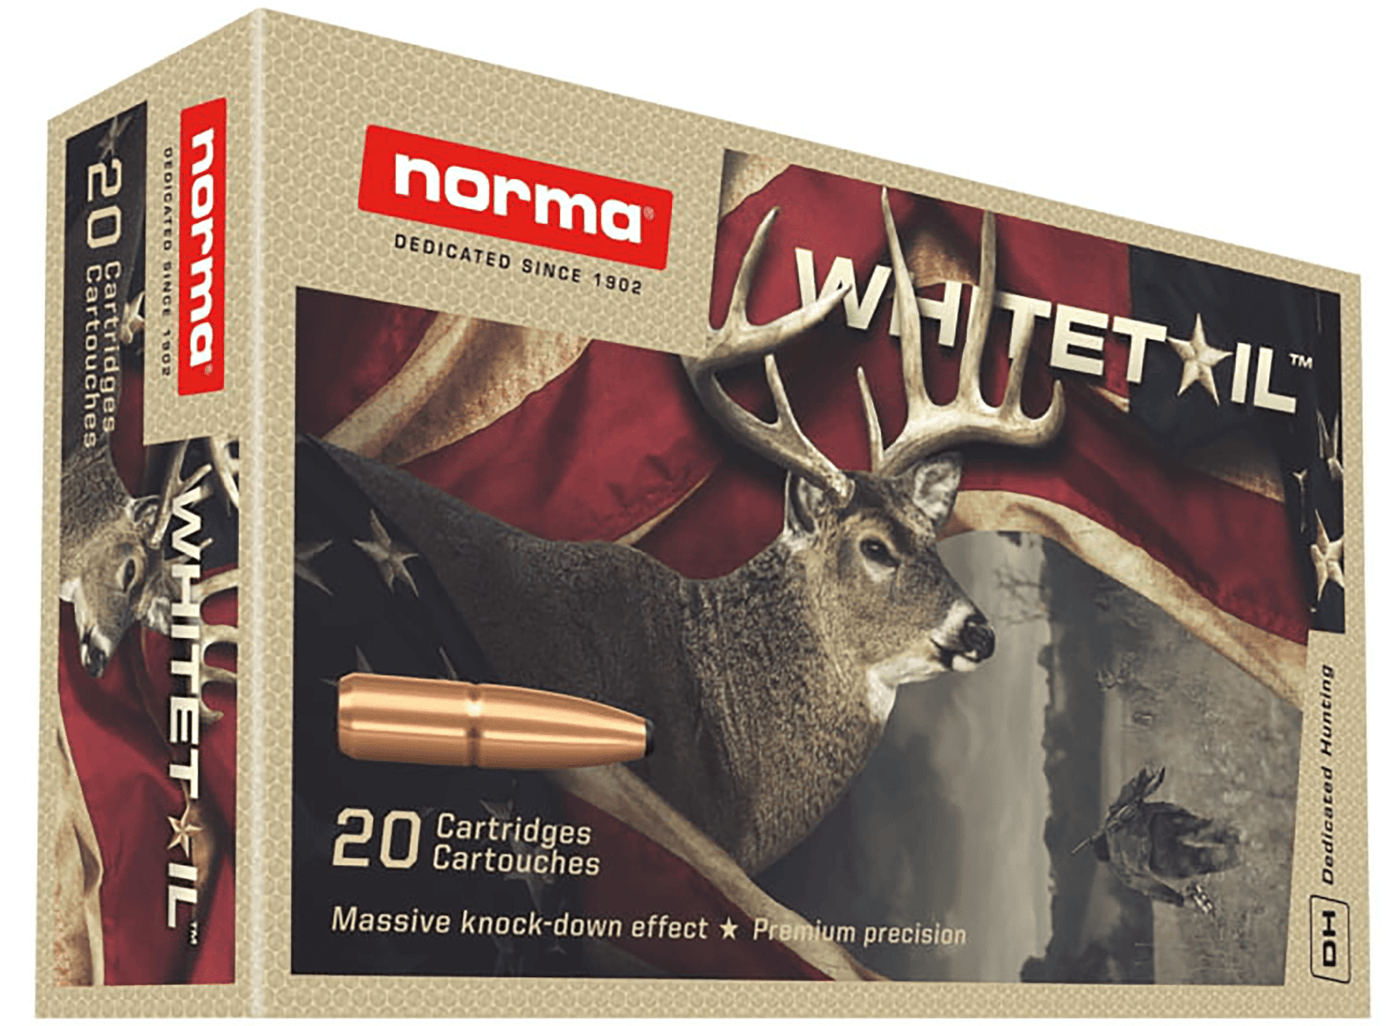 NORMA AMMUNITION (RUAG) Norma Ammunition (ruag) Whitetail, Norma 20177412 300 Win 150gr Psp Whitetail   20/10 Ammo